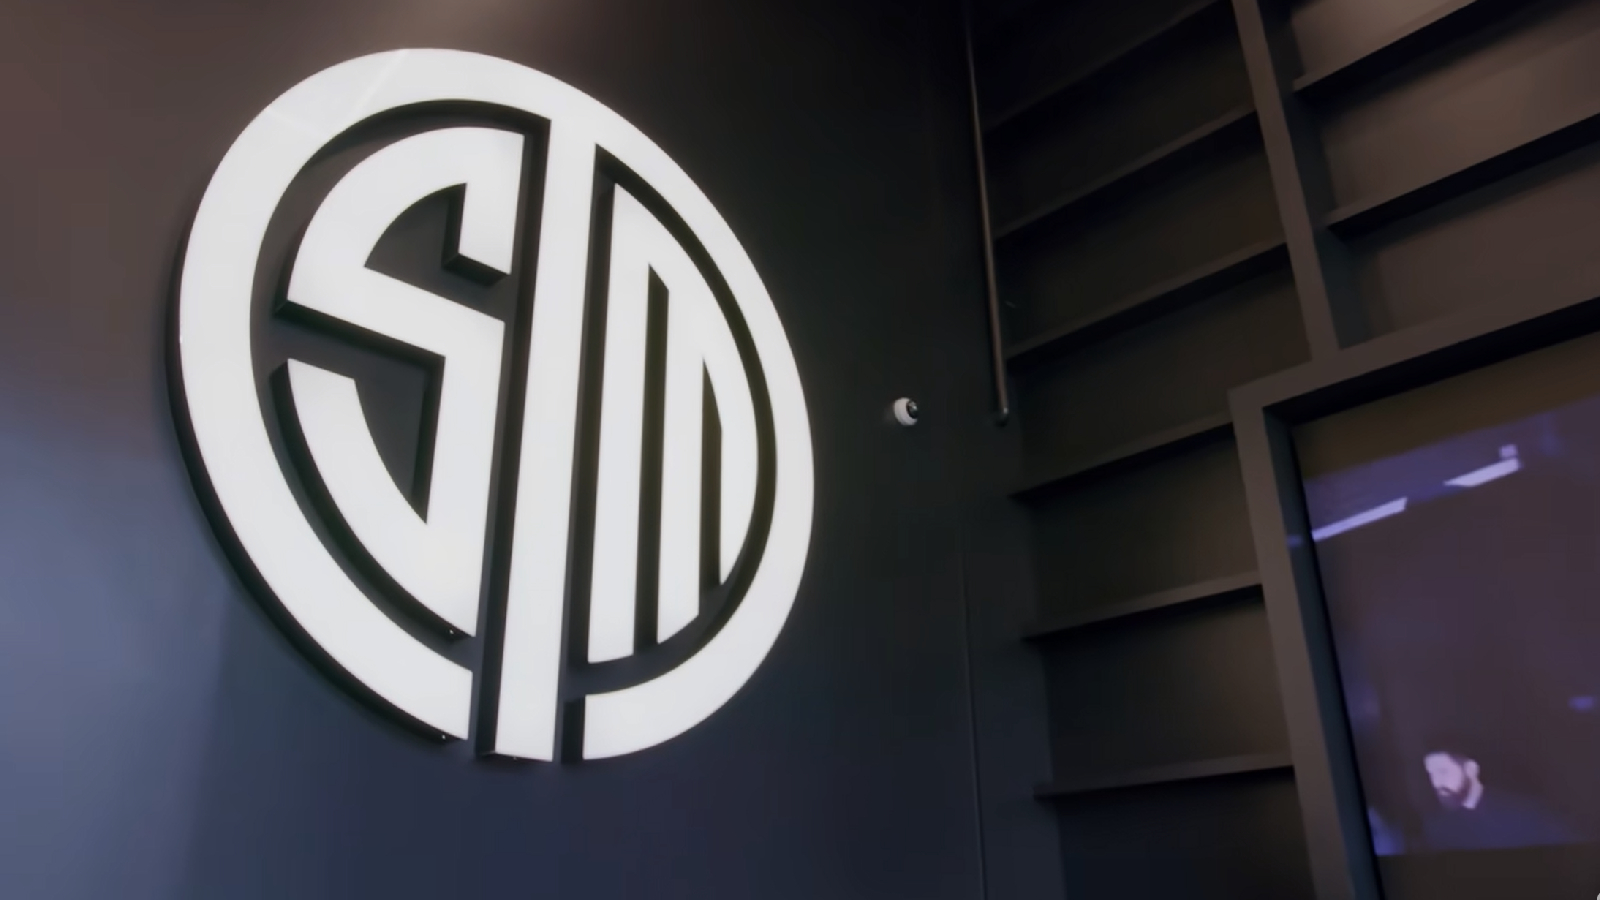 TSM could sell LCS spot and will pause several esports divisions, according to report